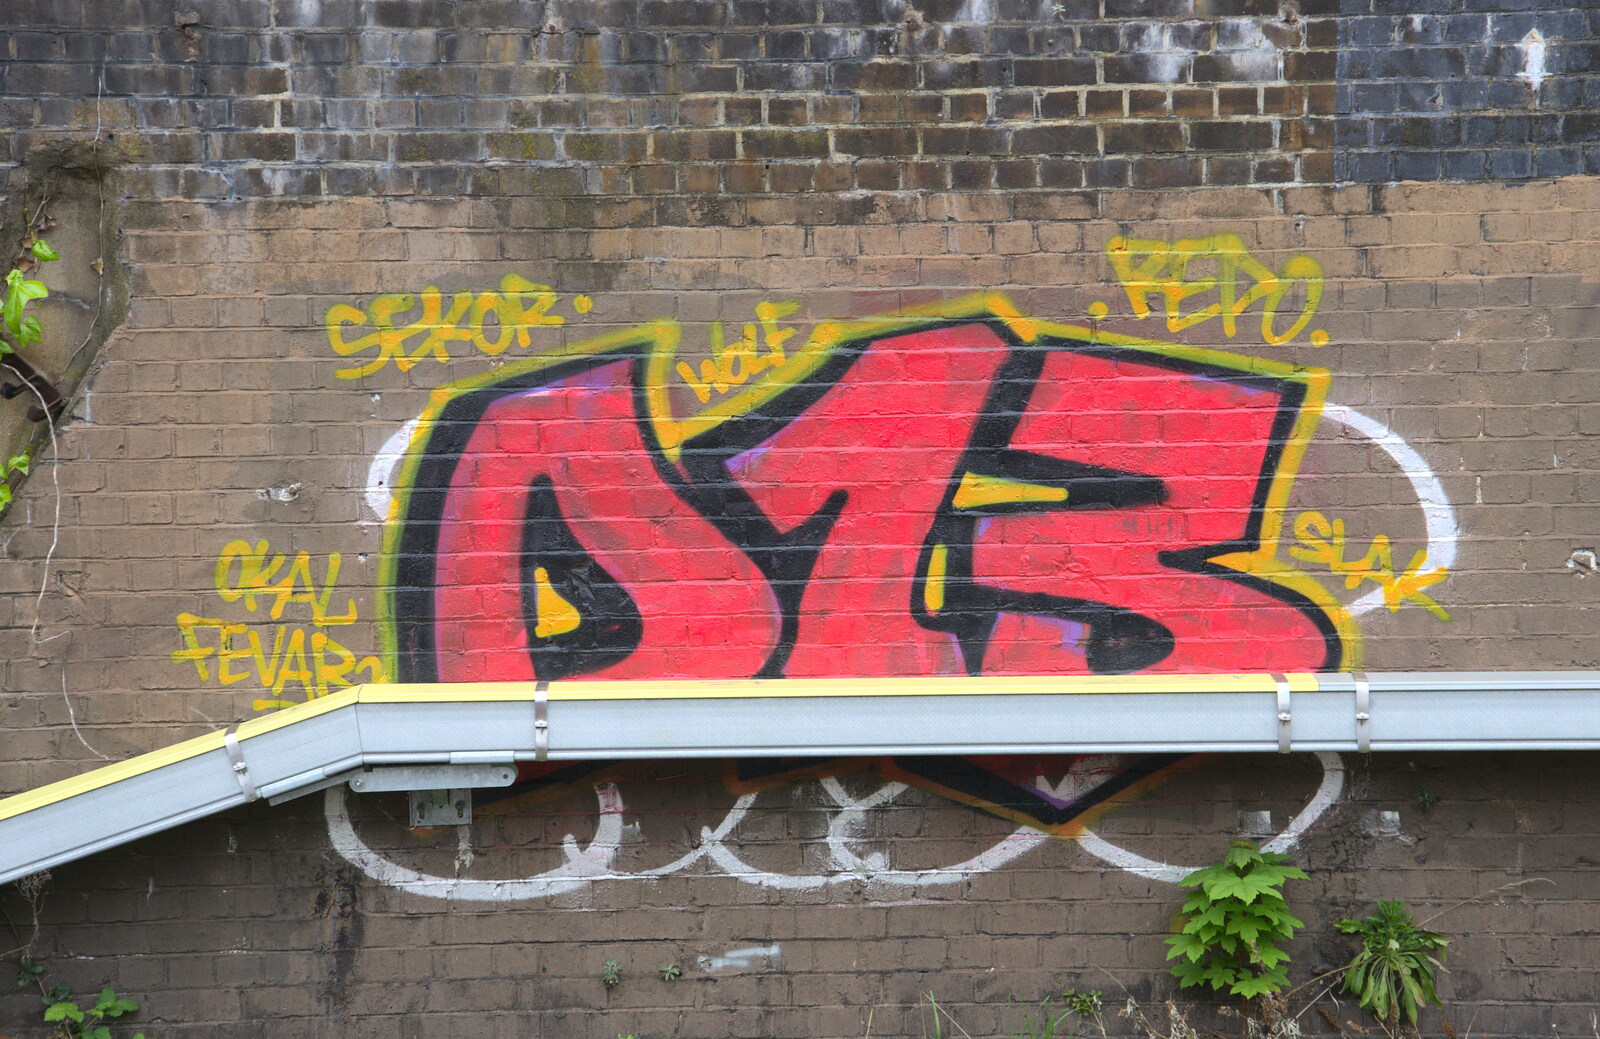 Signalling runs over graffiti on a wall from A Team Outing at Namco Funscape, South Bank, London - 27th March 2019